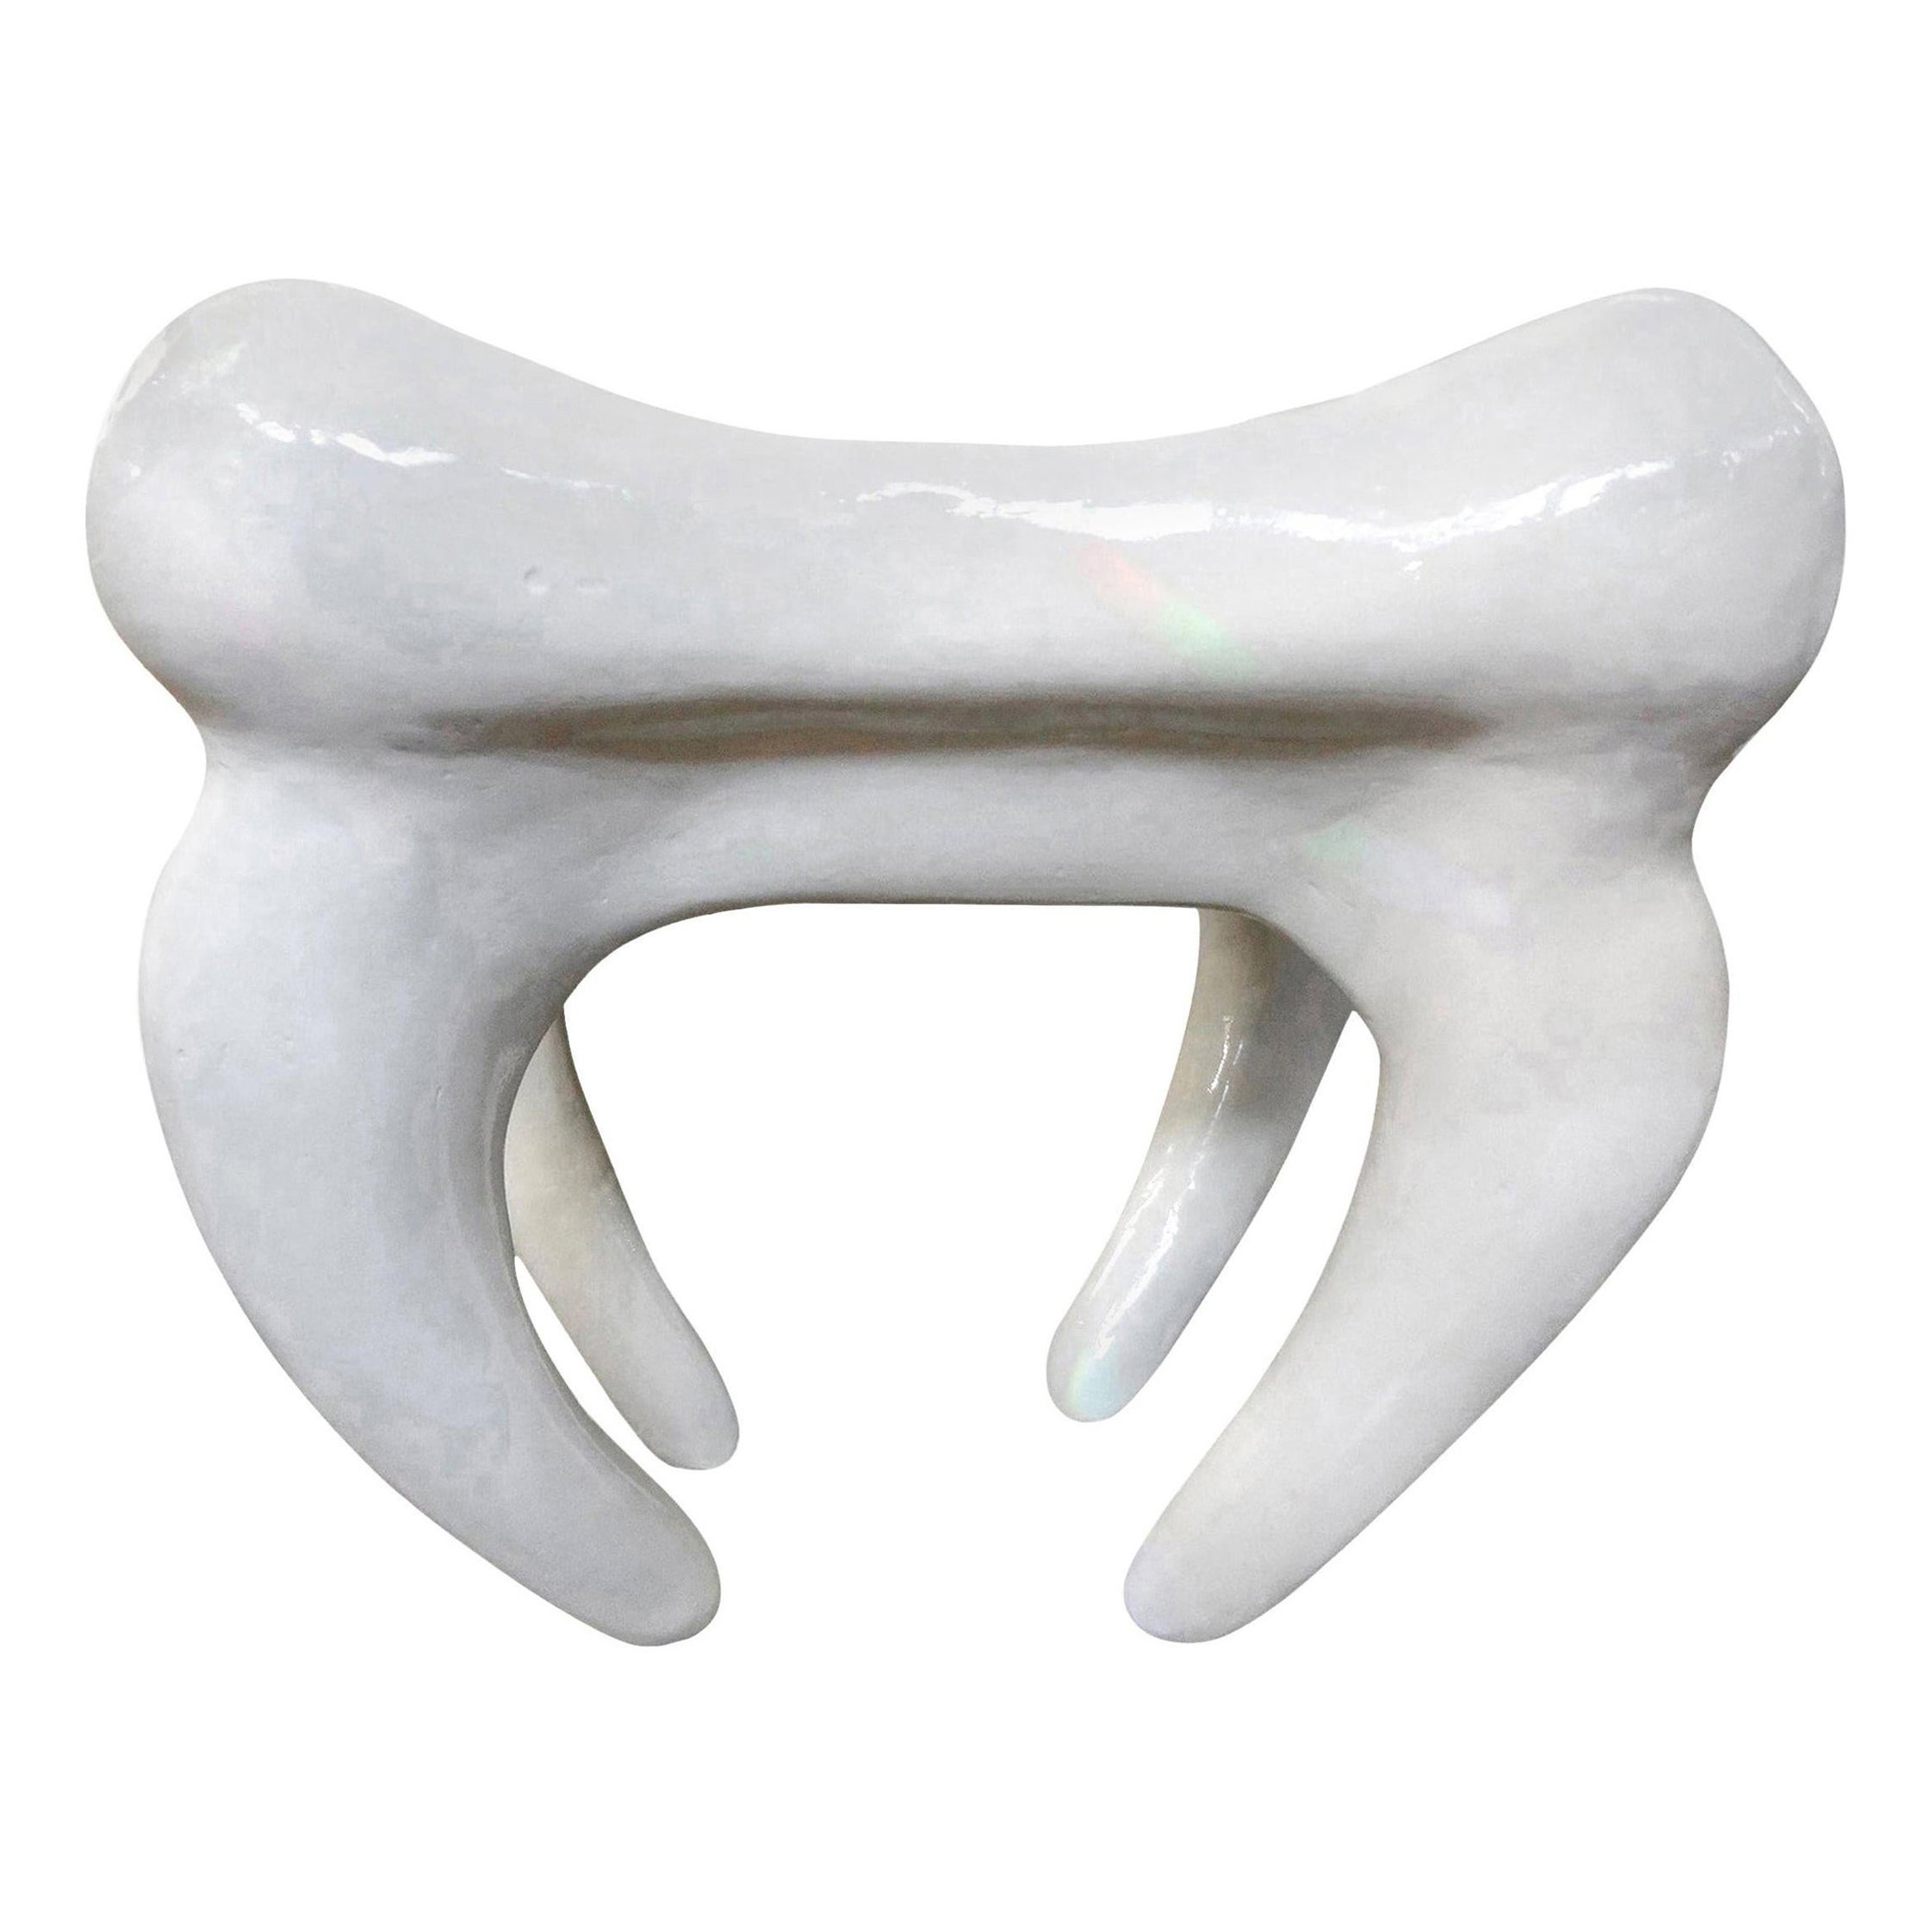 Postmodern Plaster Table in the Shape of a Molar For Sale